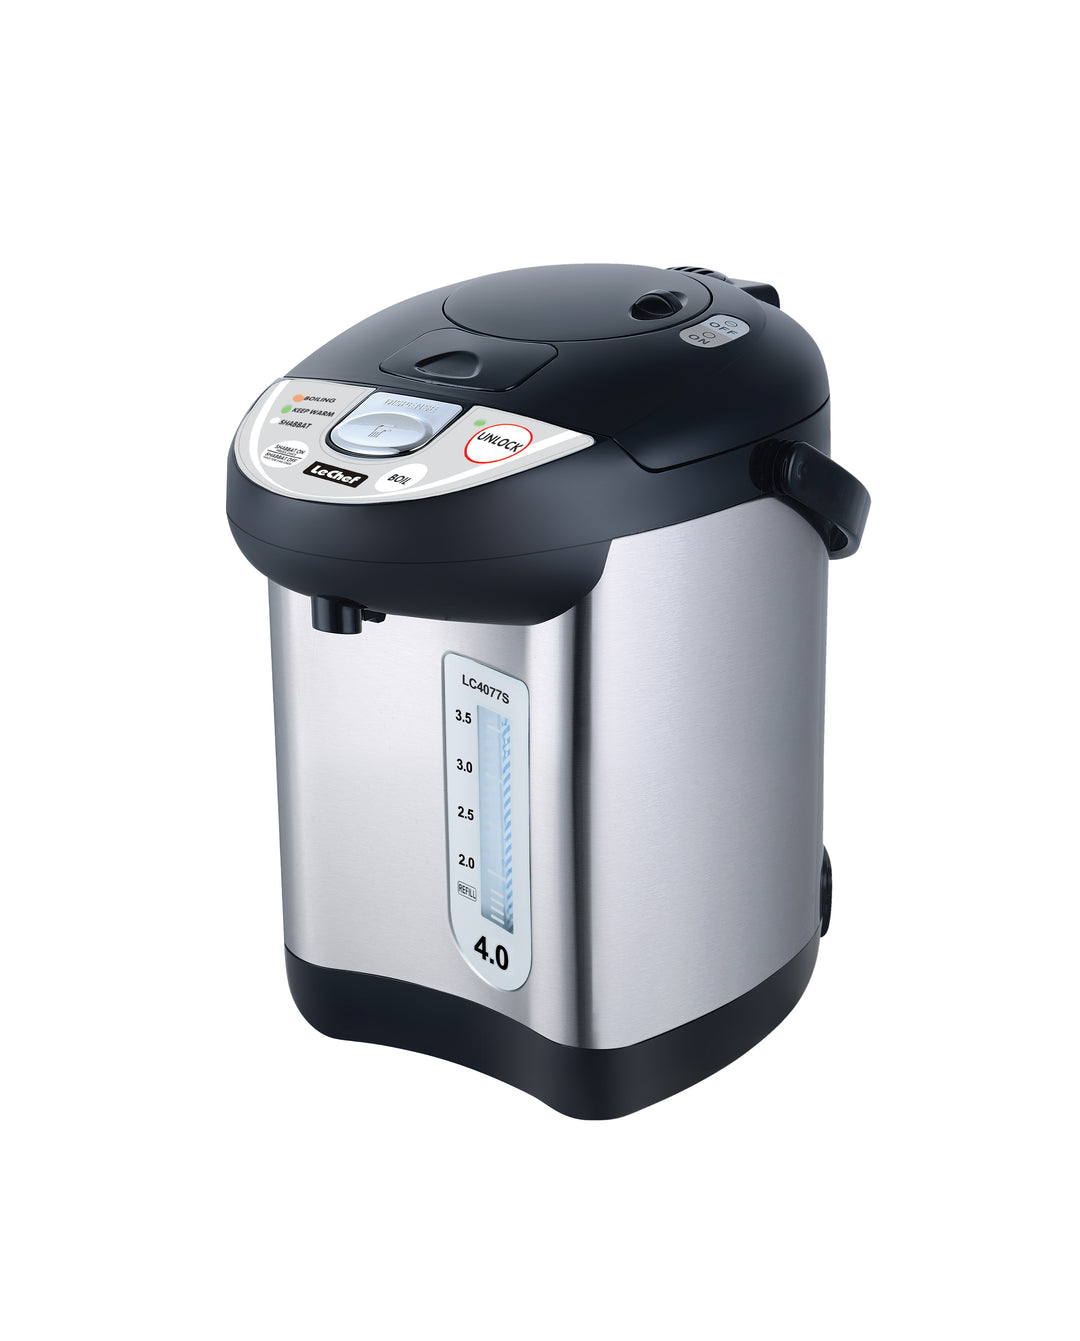 LE'CHEF ELECTRIC HOT WATER POT 4.0 QT MODEL# LC4077S WITH SHABBAT MODE